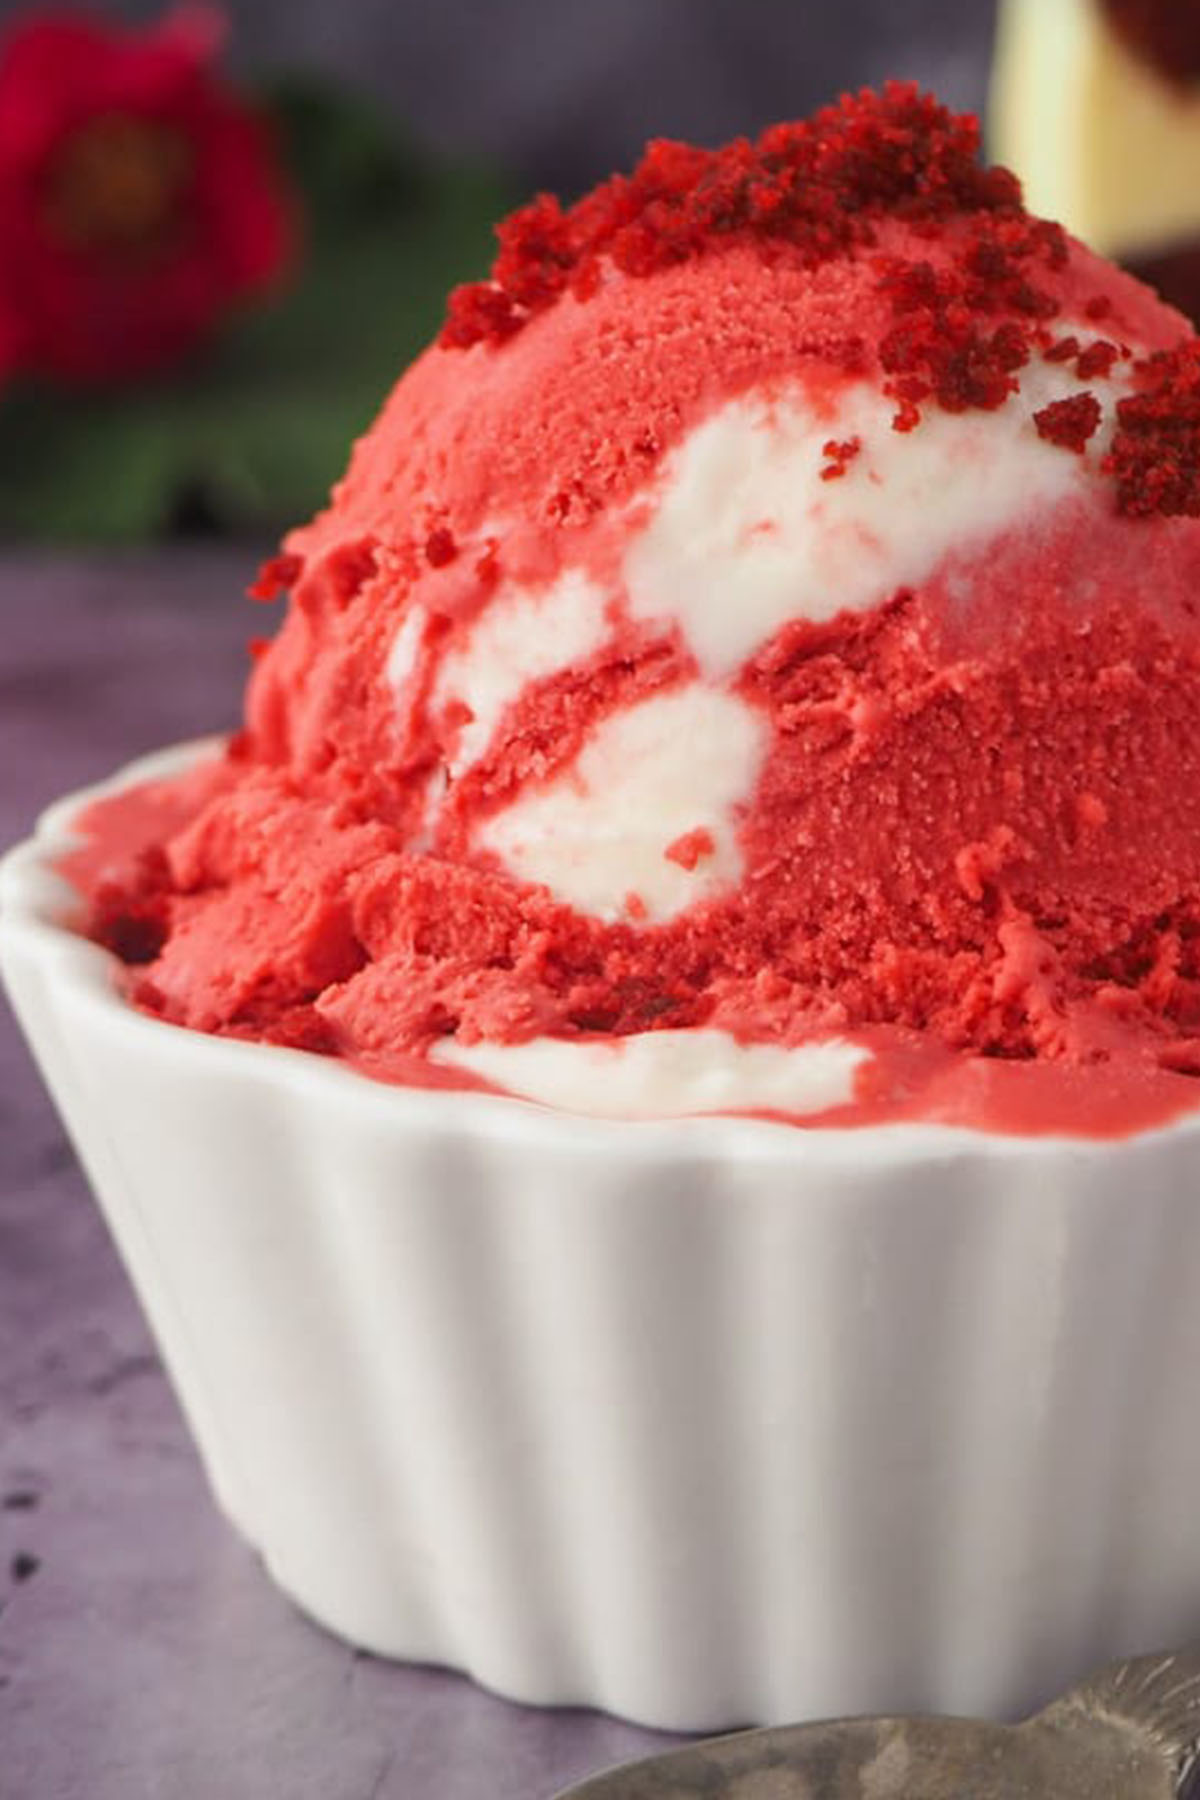 100+ List Of Ice Cream Flavors By Color - Homebody Eats